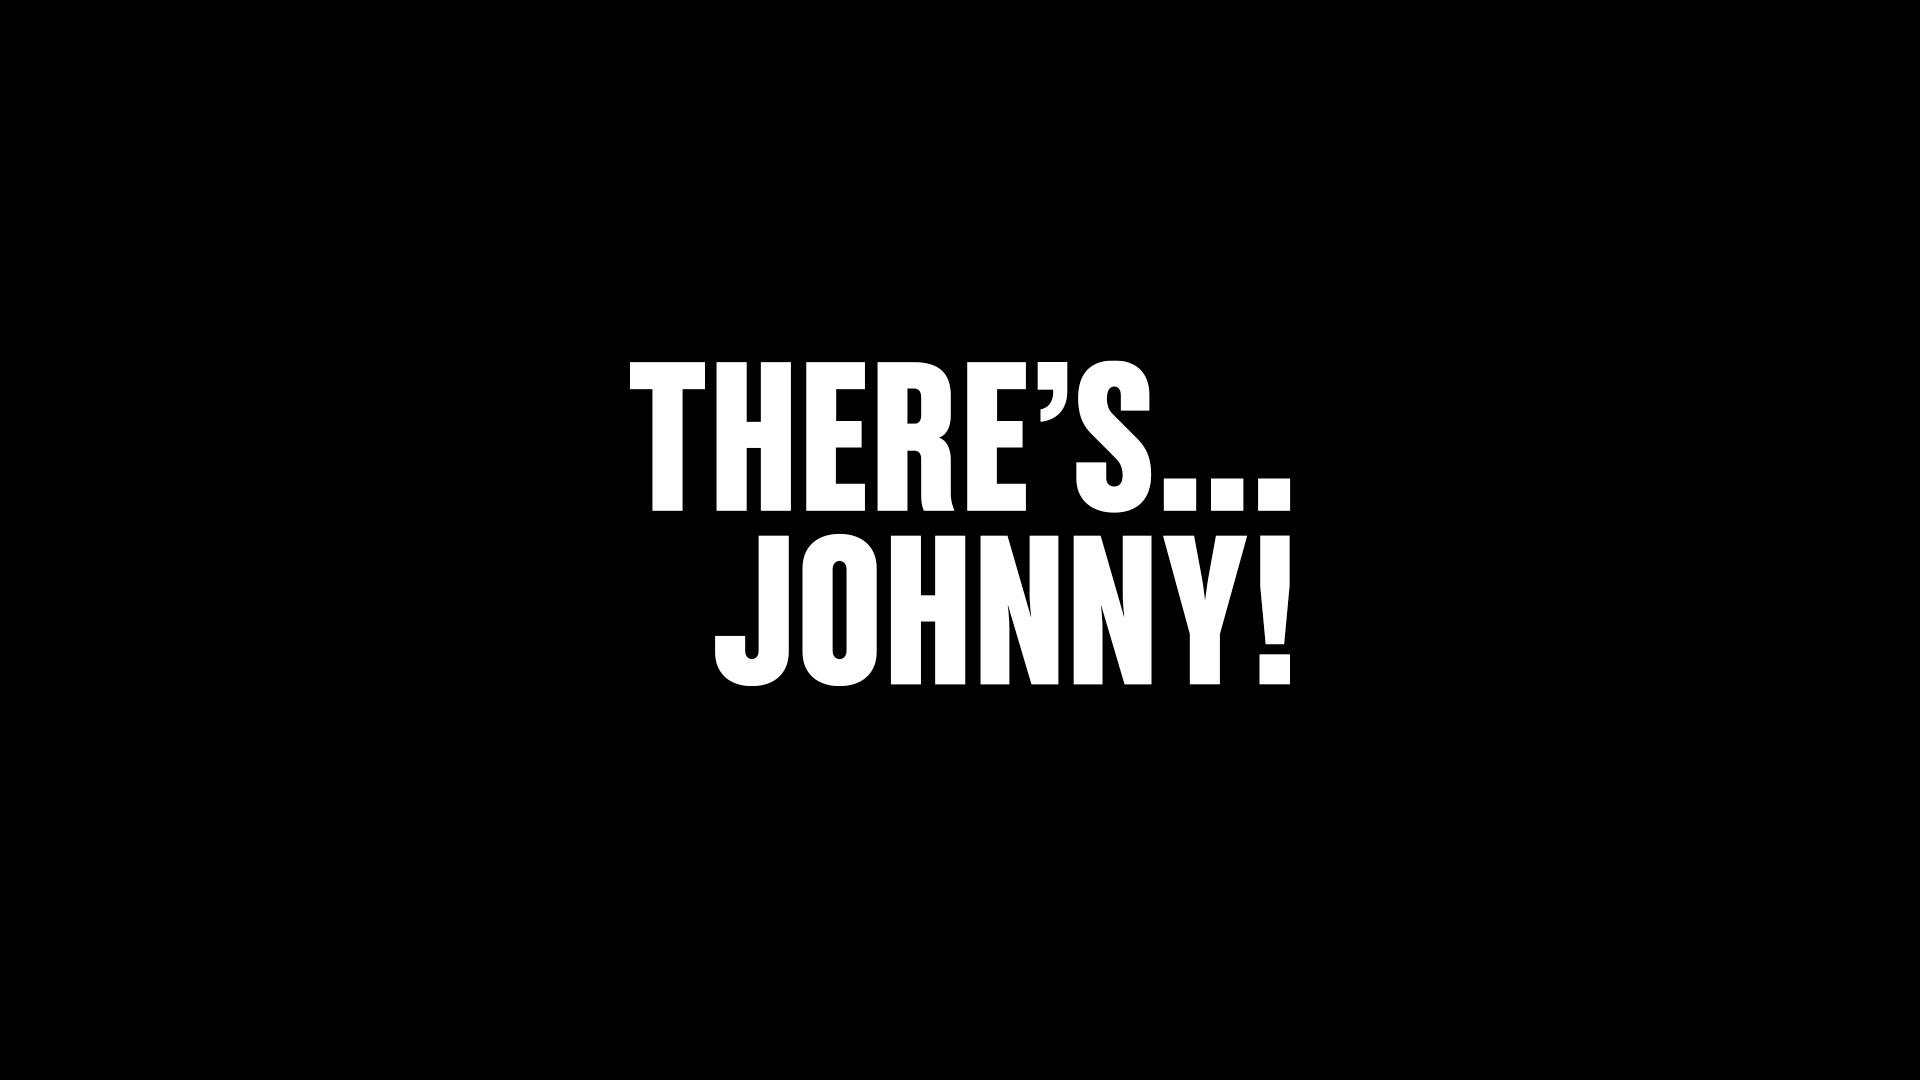 There's... Johnny!